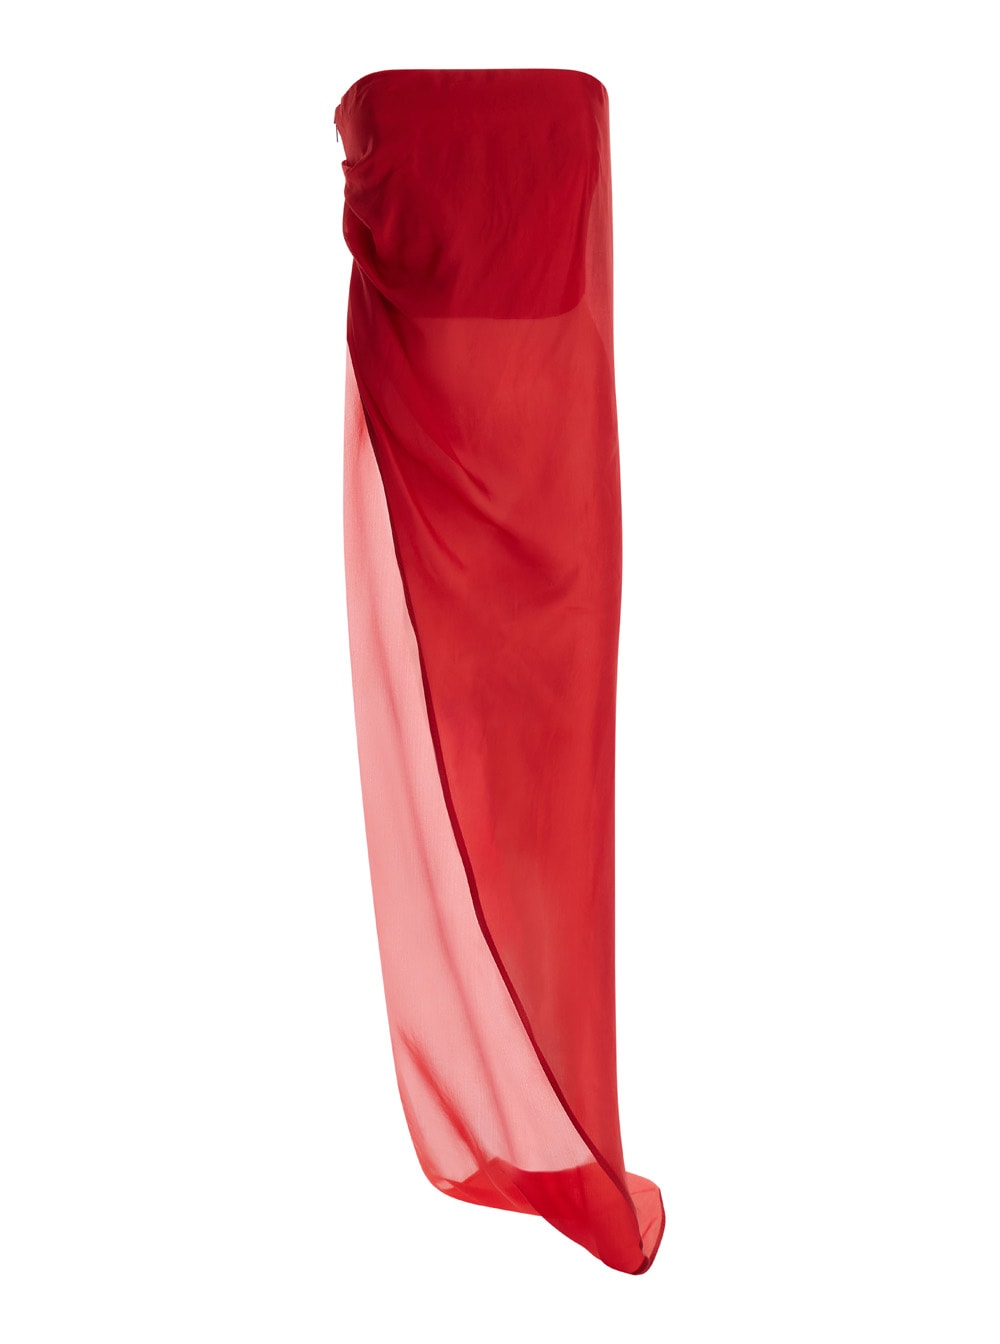 RICK OWENS RED STRAPLESS ASYMMETRIC LONG TOP IN SILK WOMAN